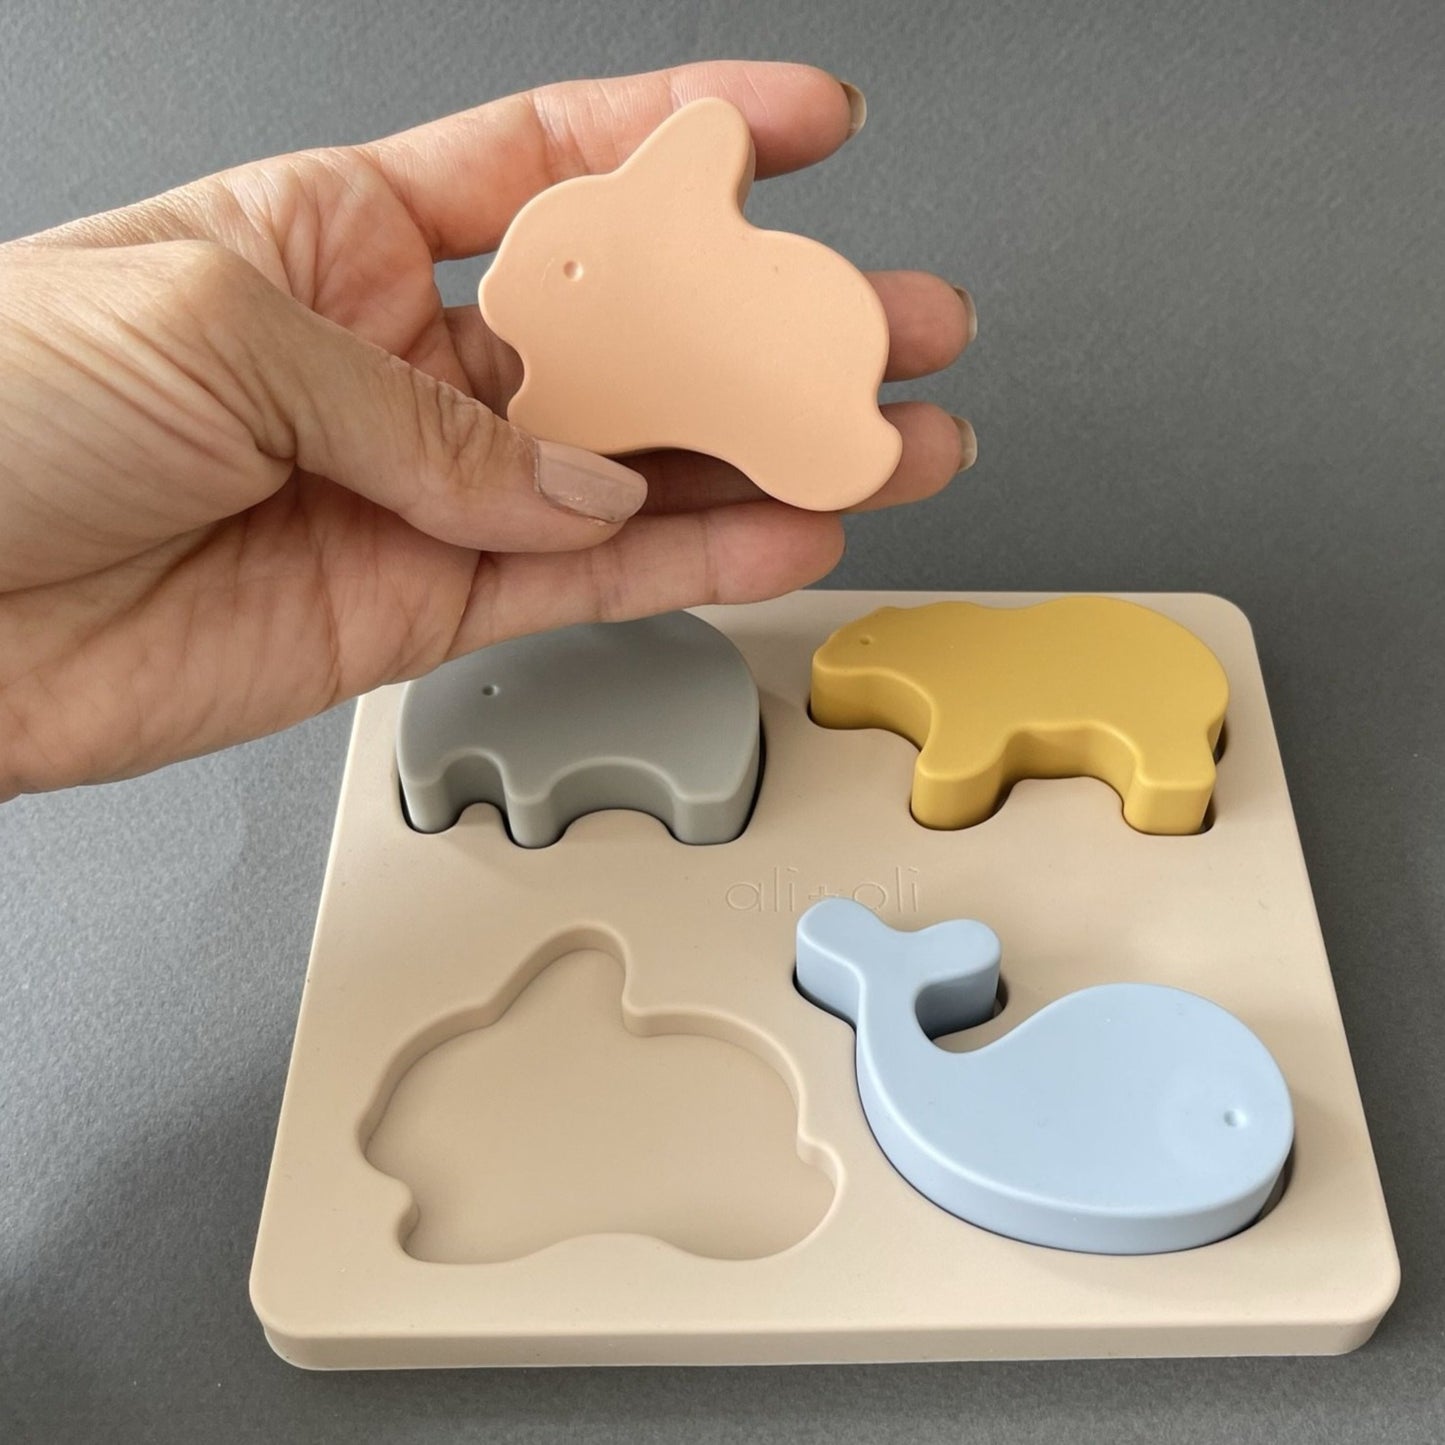 Baby Soft Silicone Mini-Animal Puzzle (4-pc) Toys for Toddlers